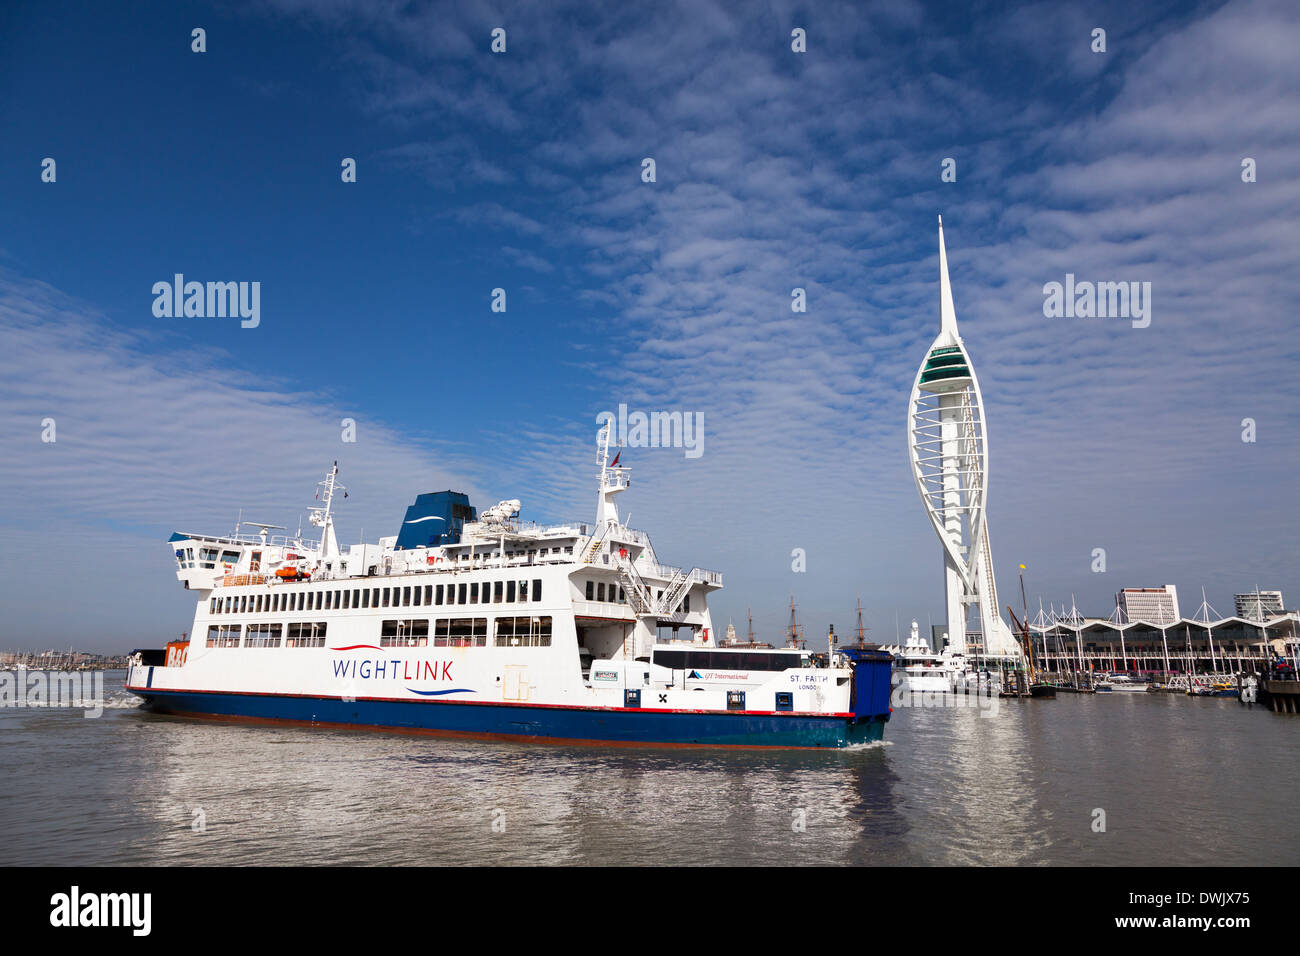 Wightlink car ferry in Portsmouth Harbour with the Spinnaker Tower. Stock Photo